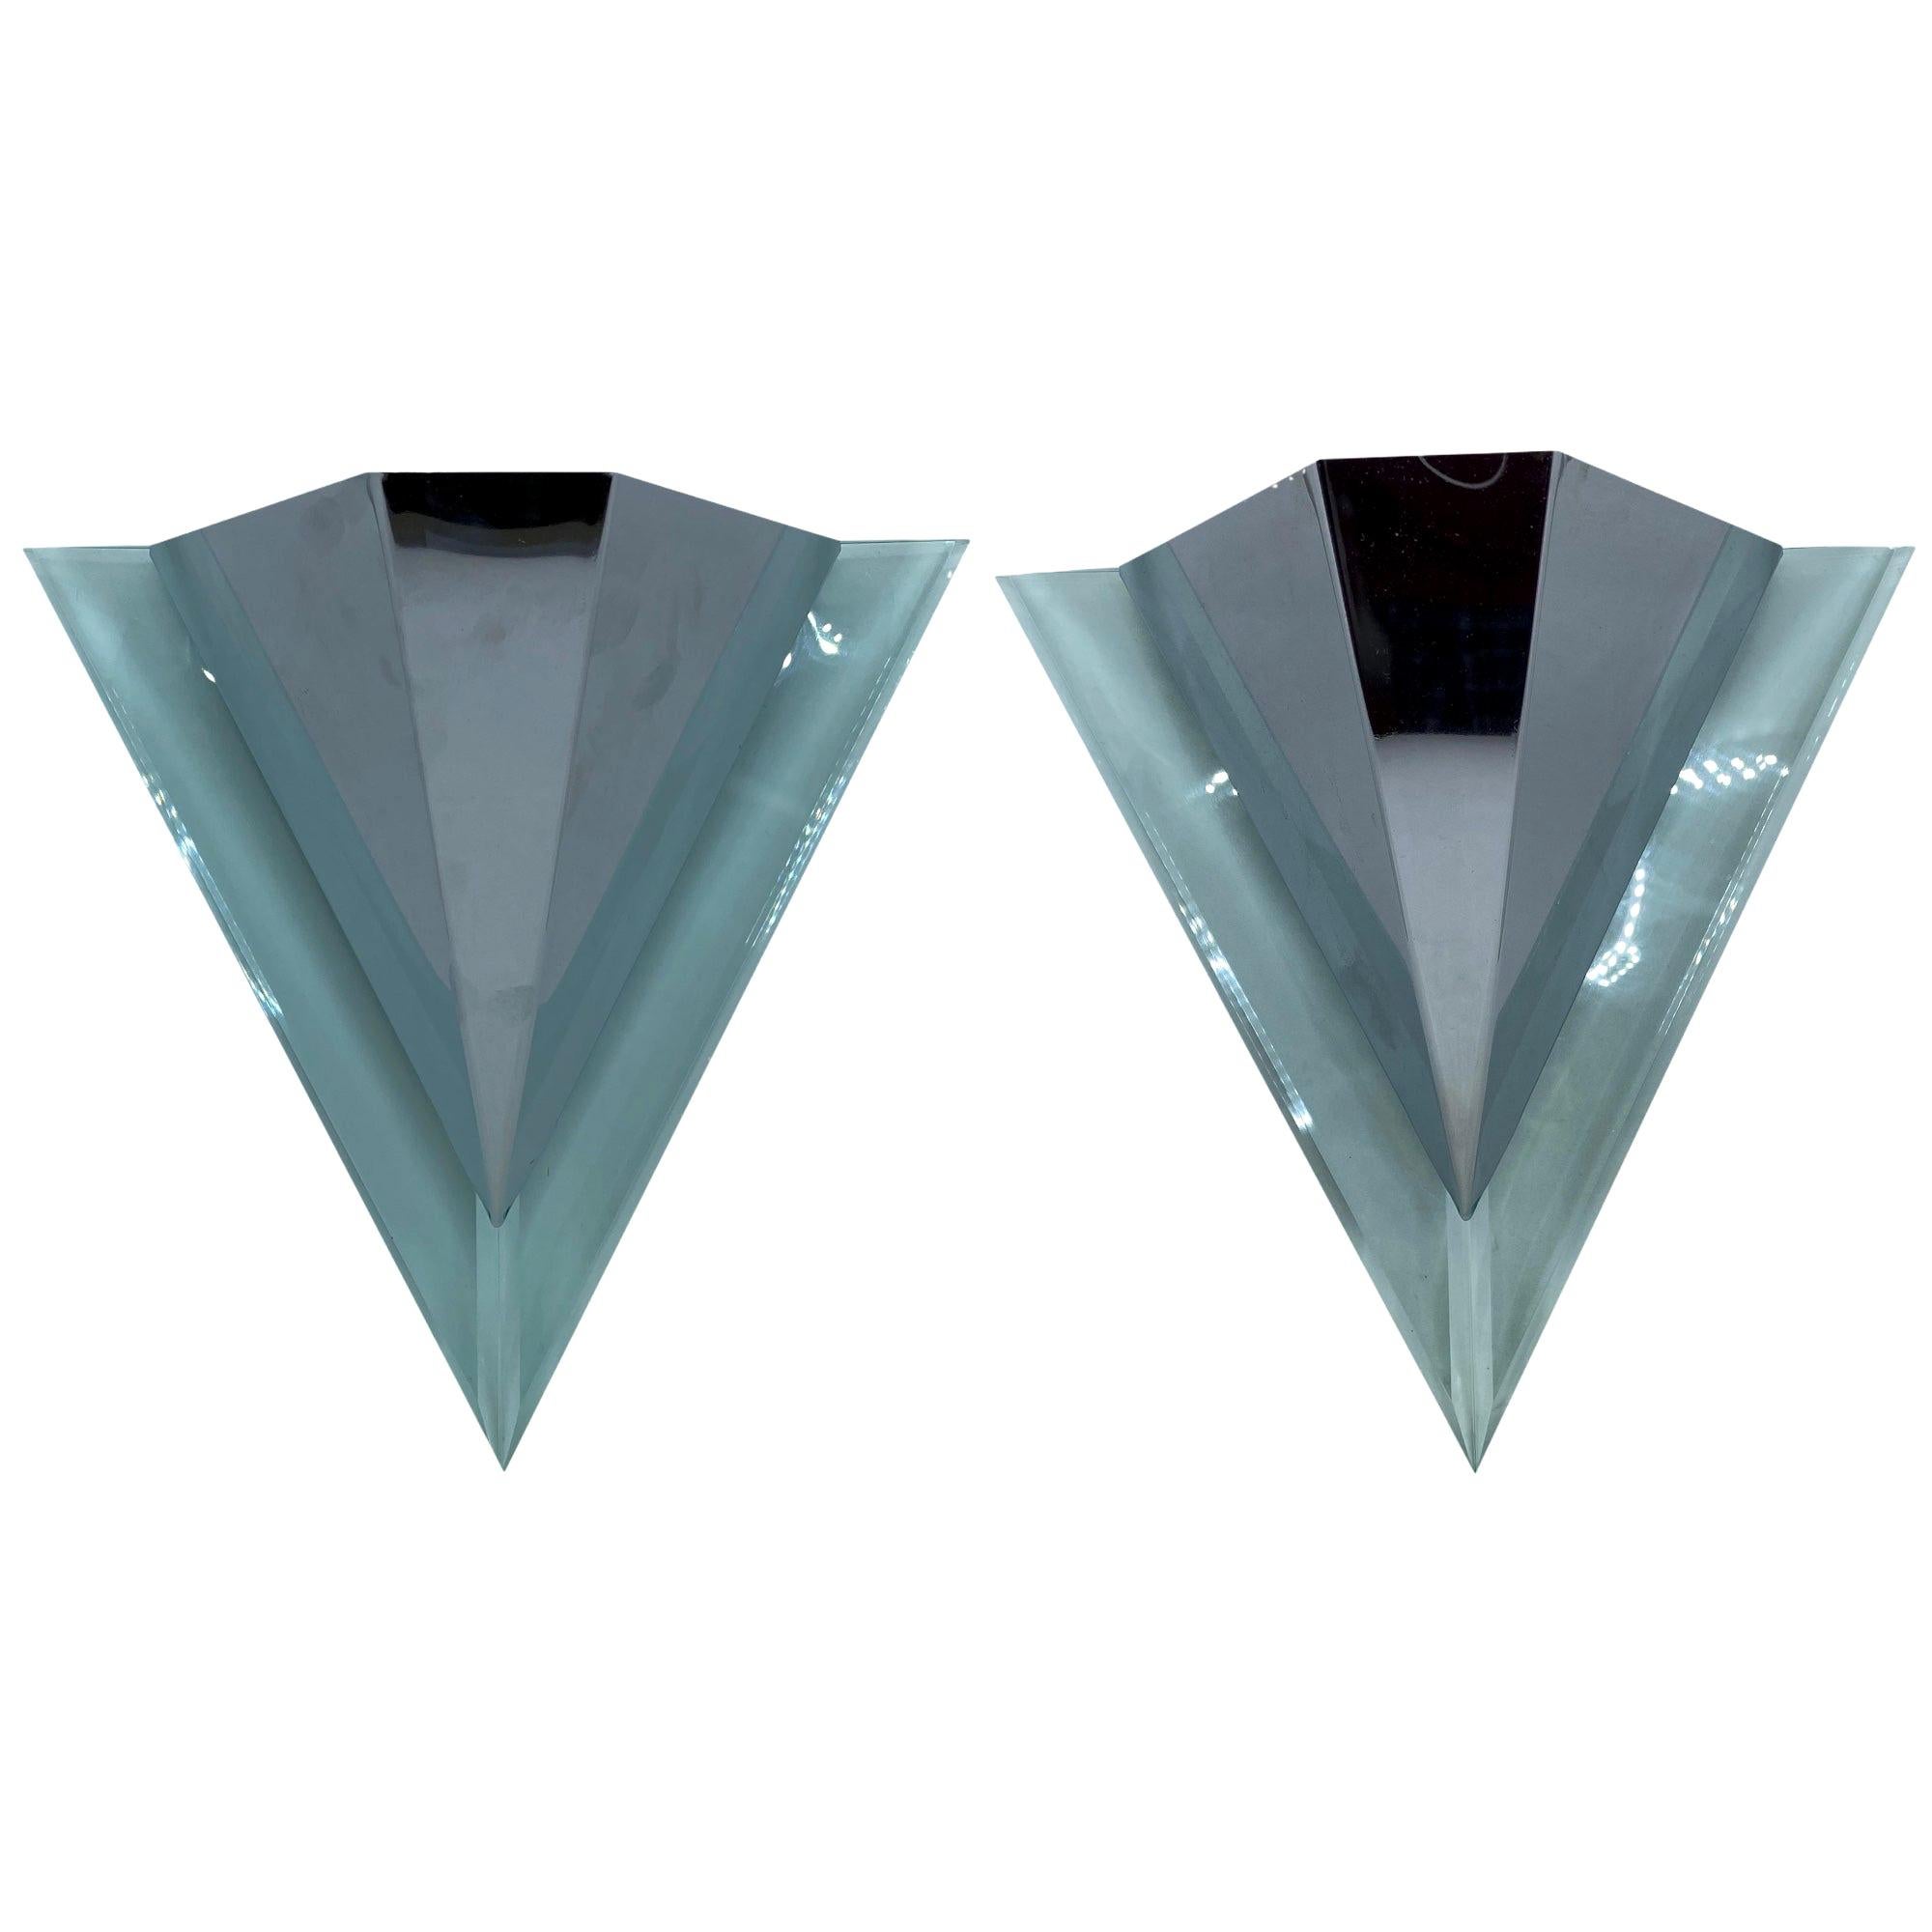 Stunning Pair of Lucite and Chrome Modern Sconces, Germany, 1980s For Sale